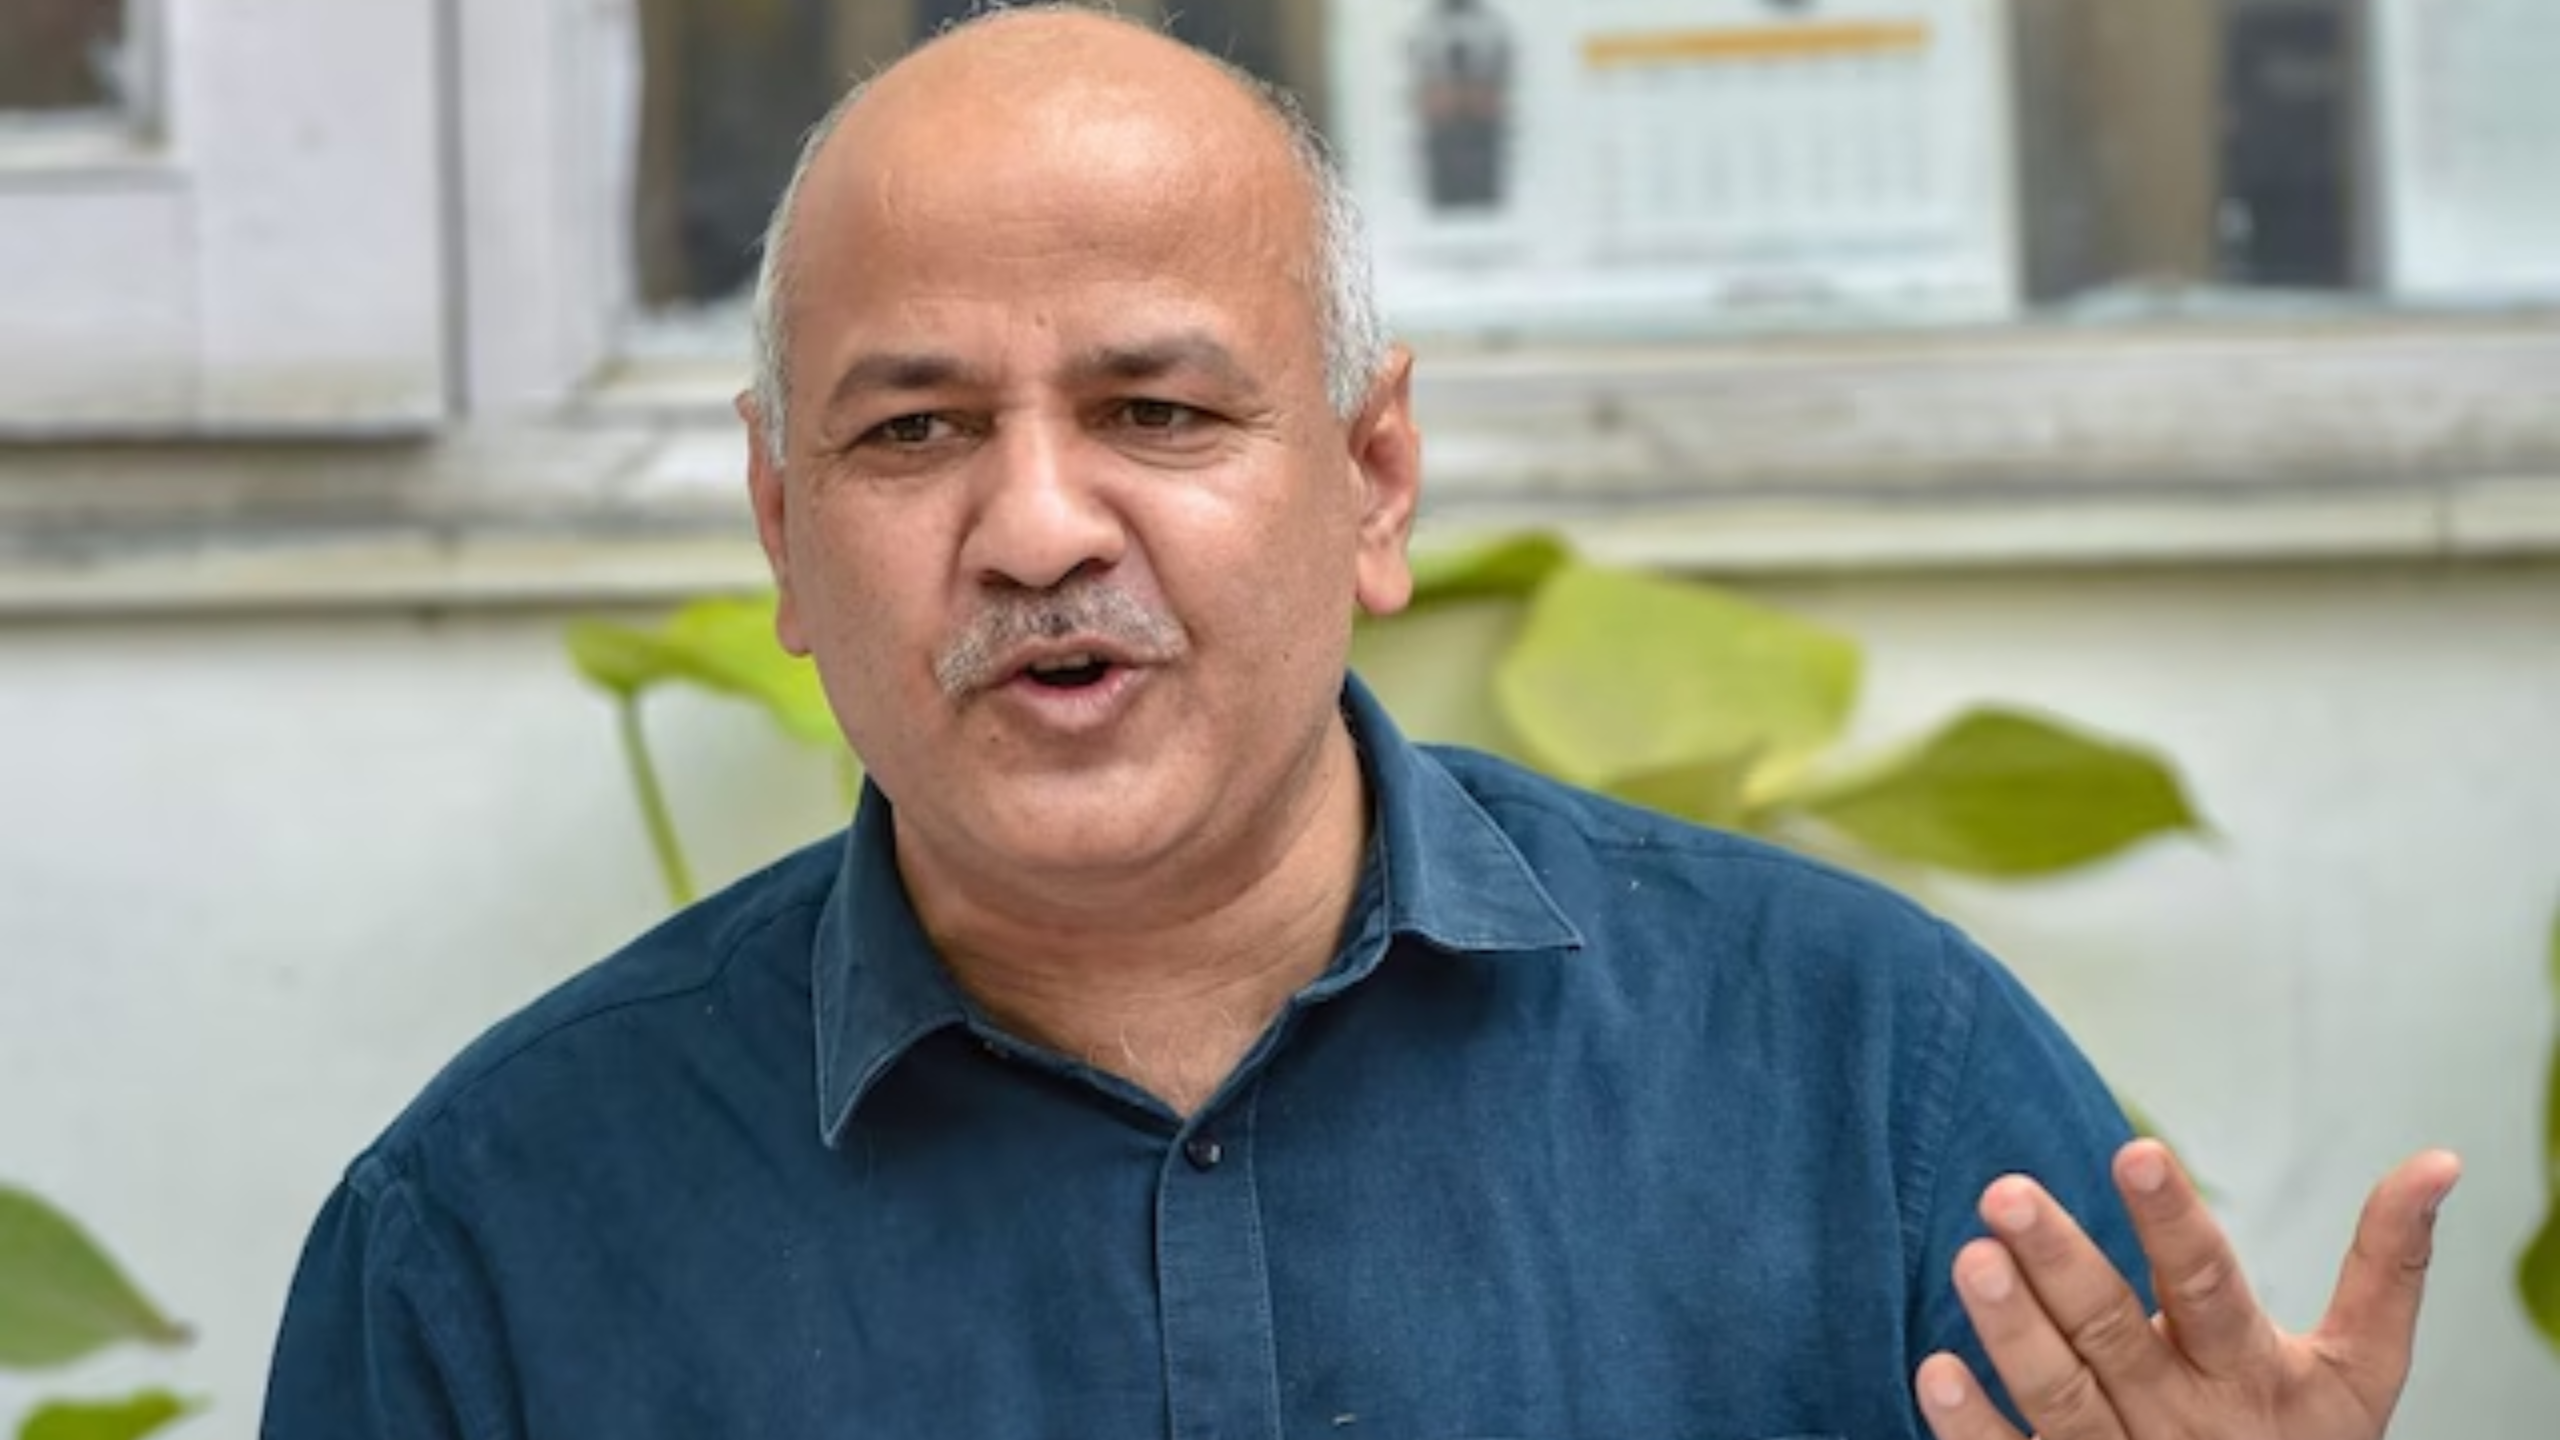 Delhi Excise Policy Case: Manish Sisodia’s Bail Denied By Court For Second Time